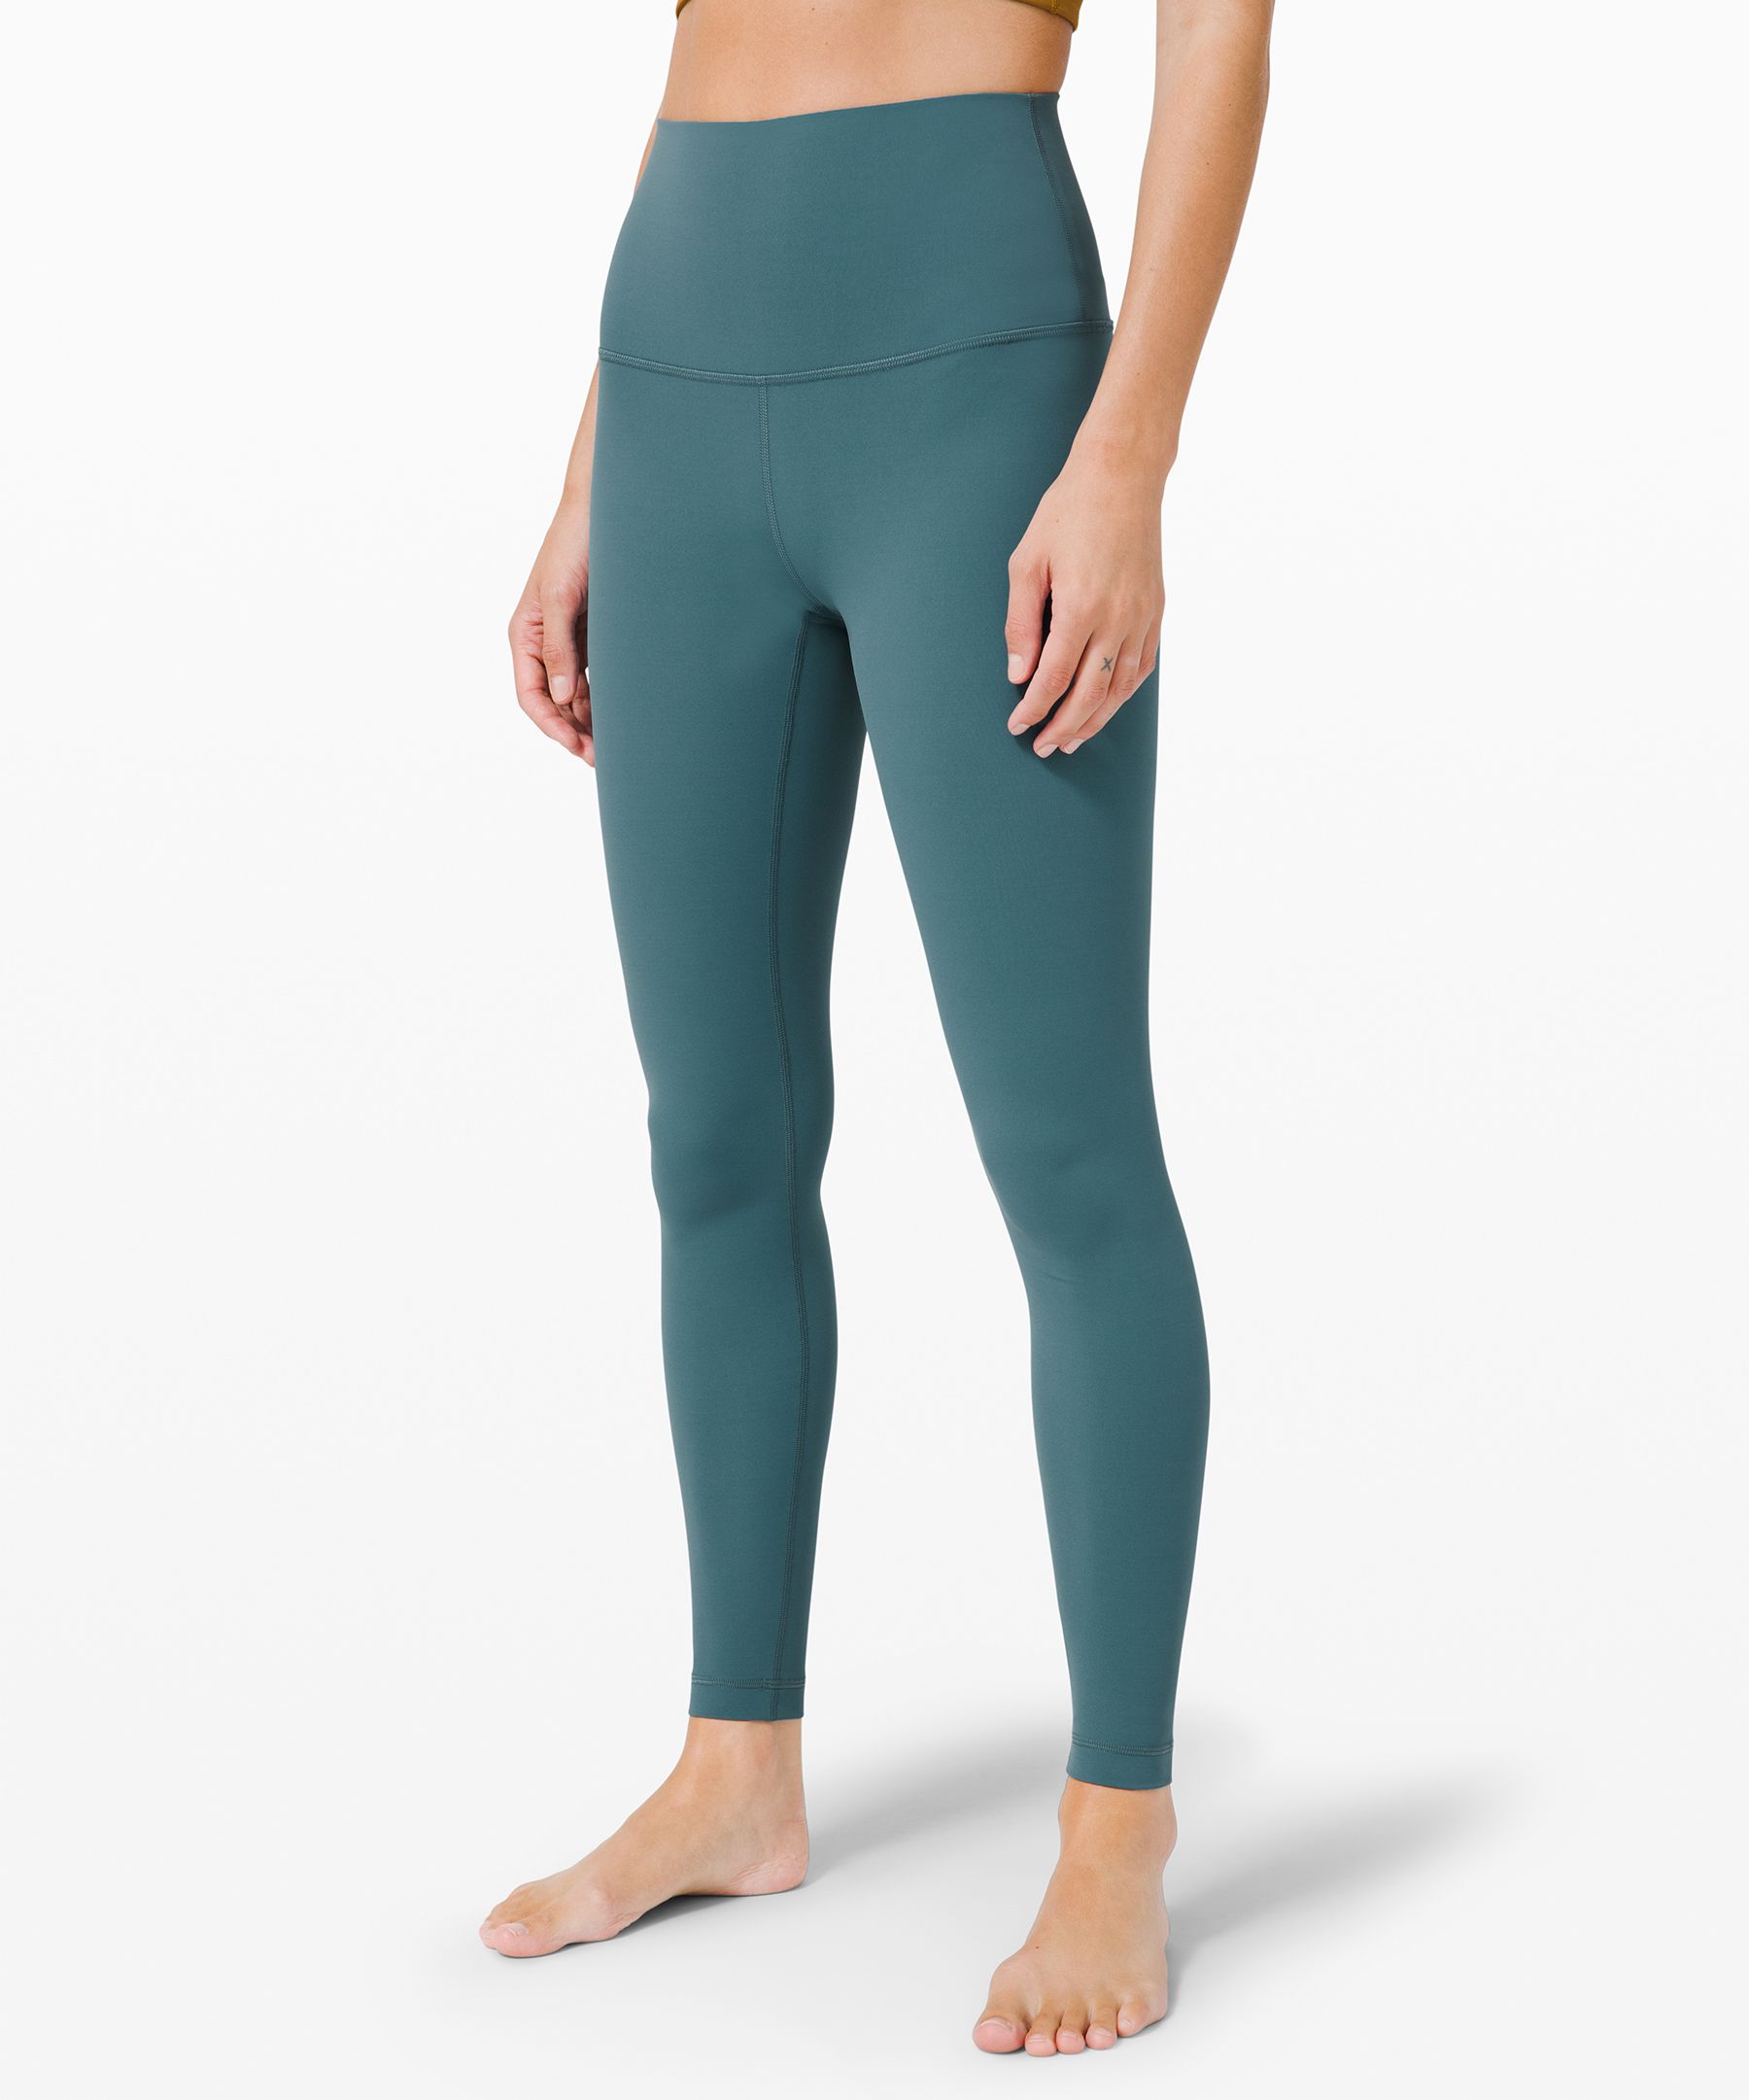 Lululemon Wunder Under Super High-rise Tight 28" *full-on Luxtreme Online Only In Green